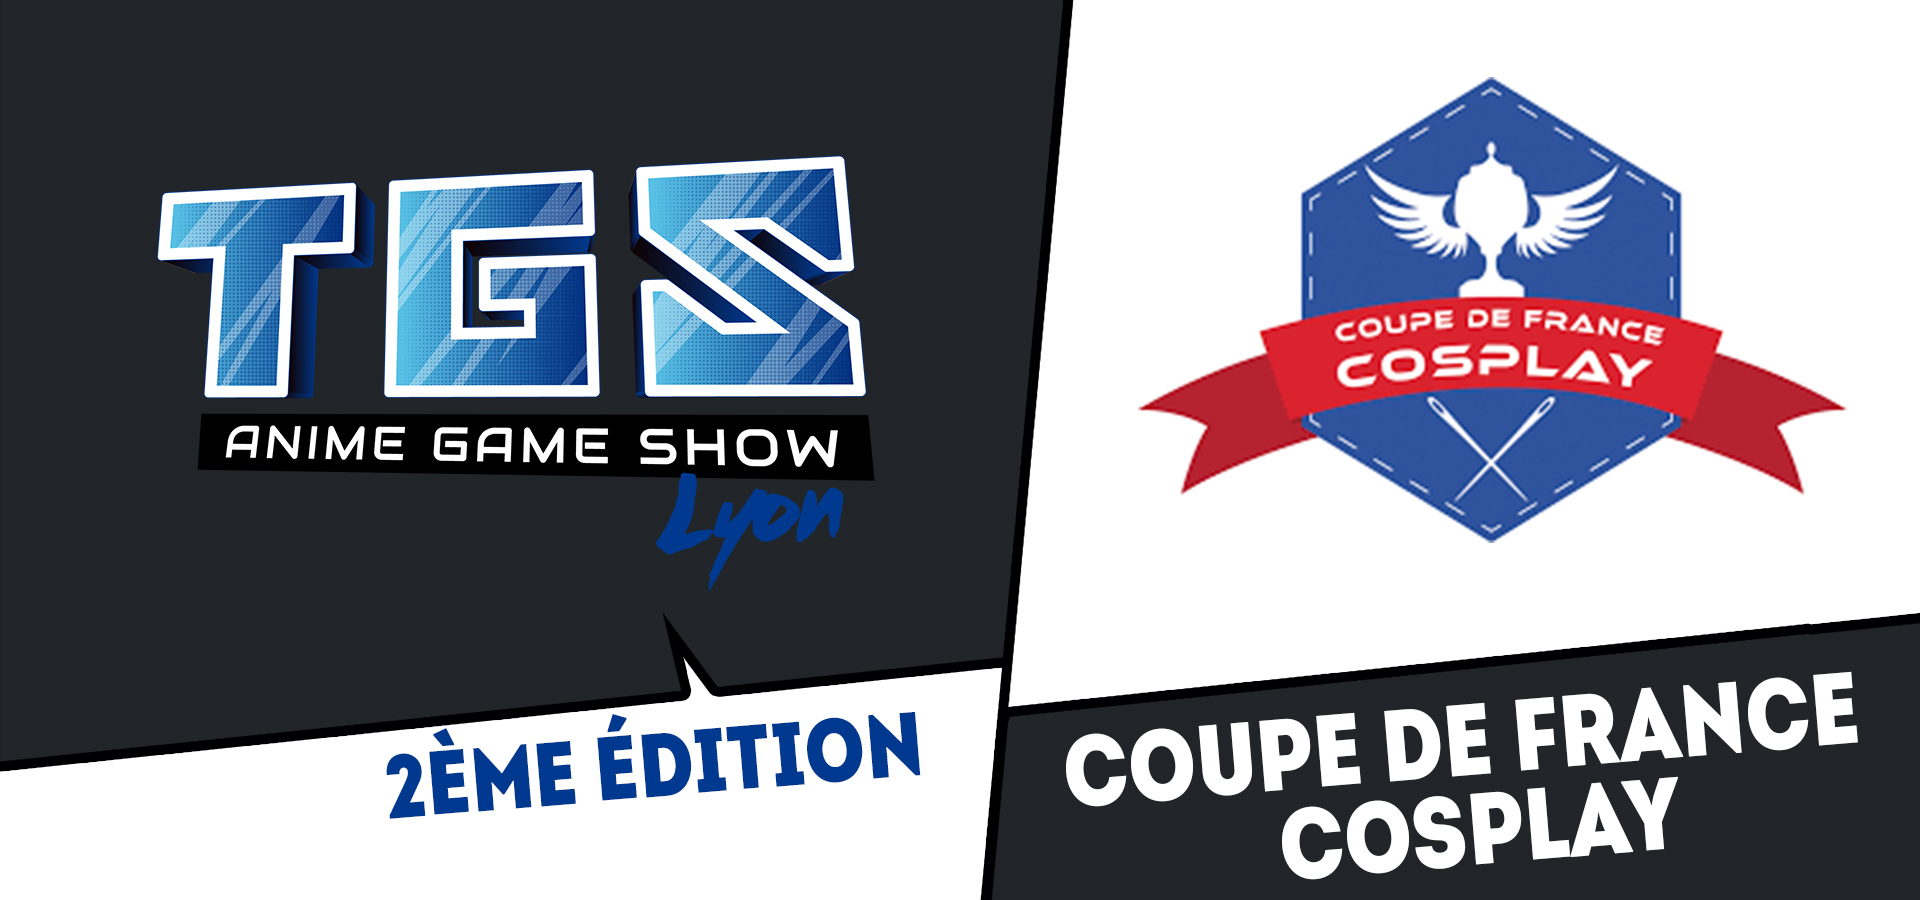 https://www.tgs-lyongameshow.fr/Concours cosplay